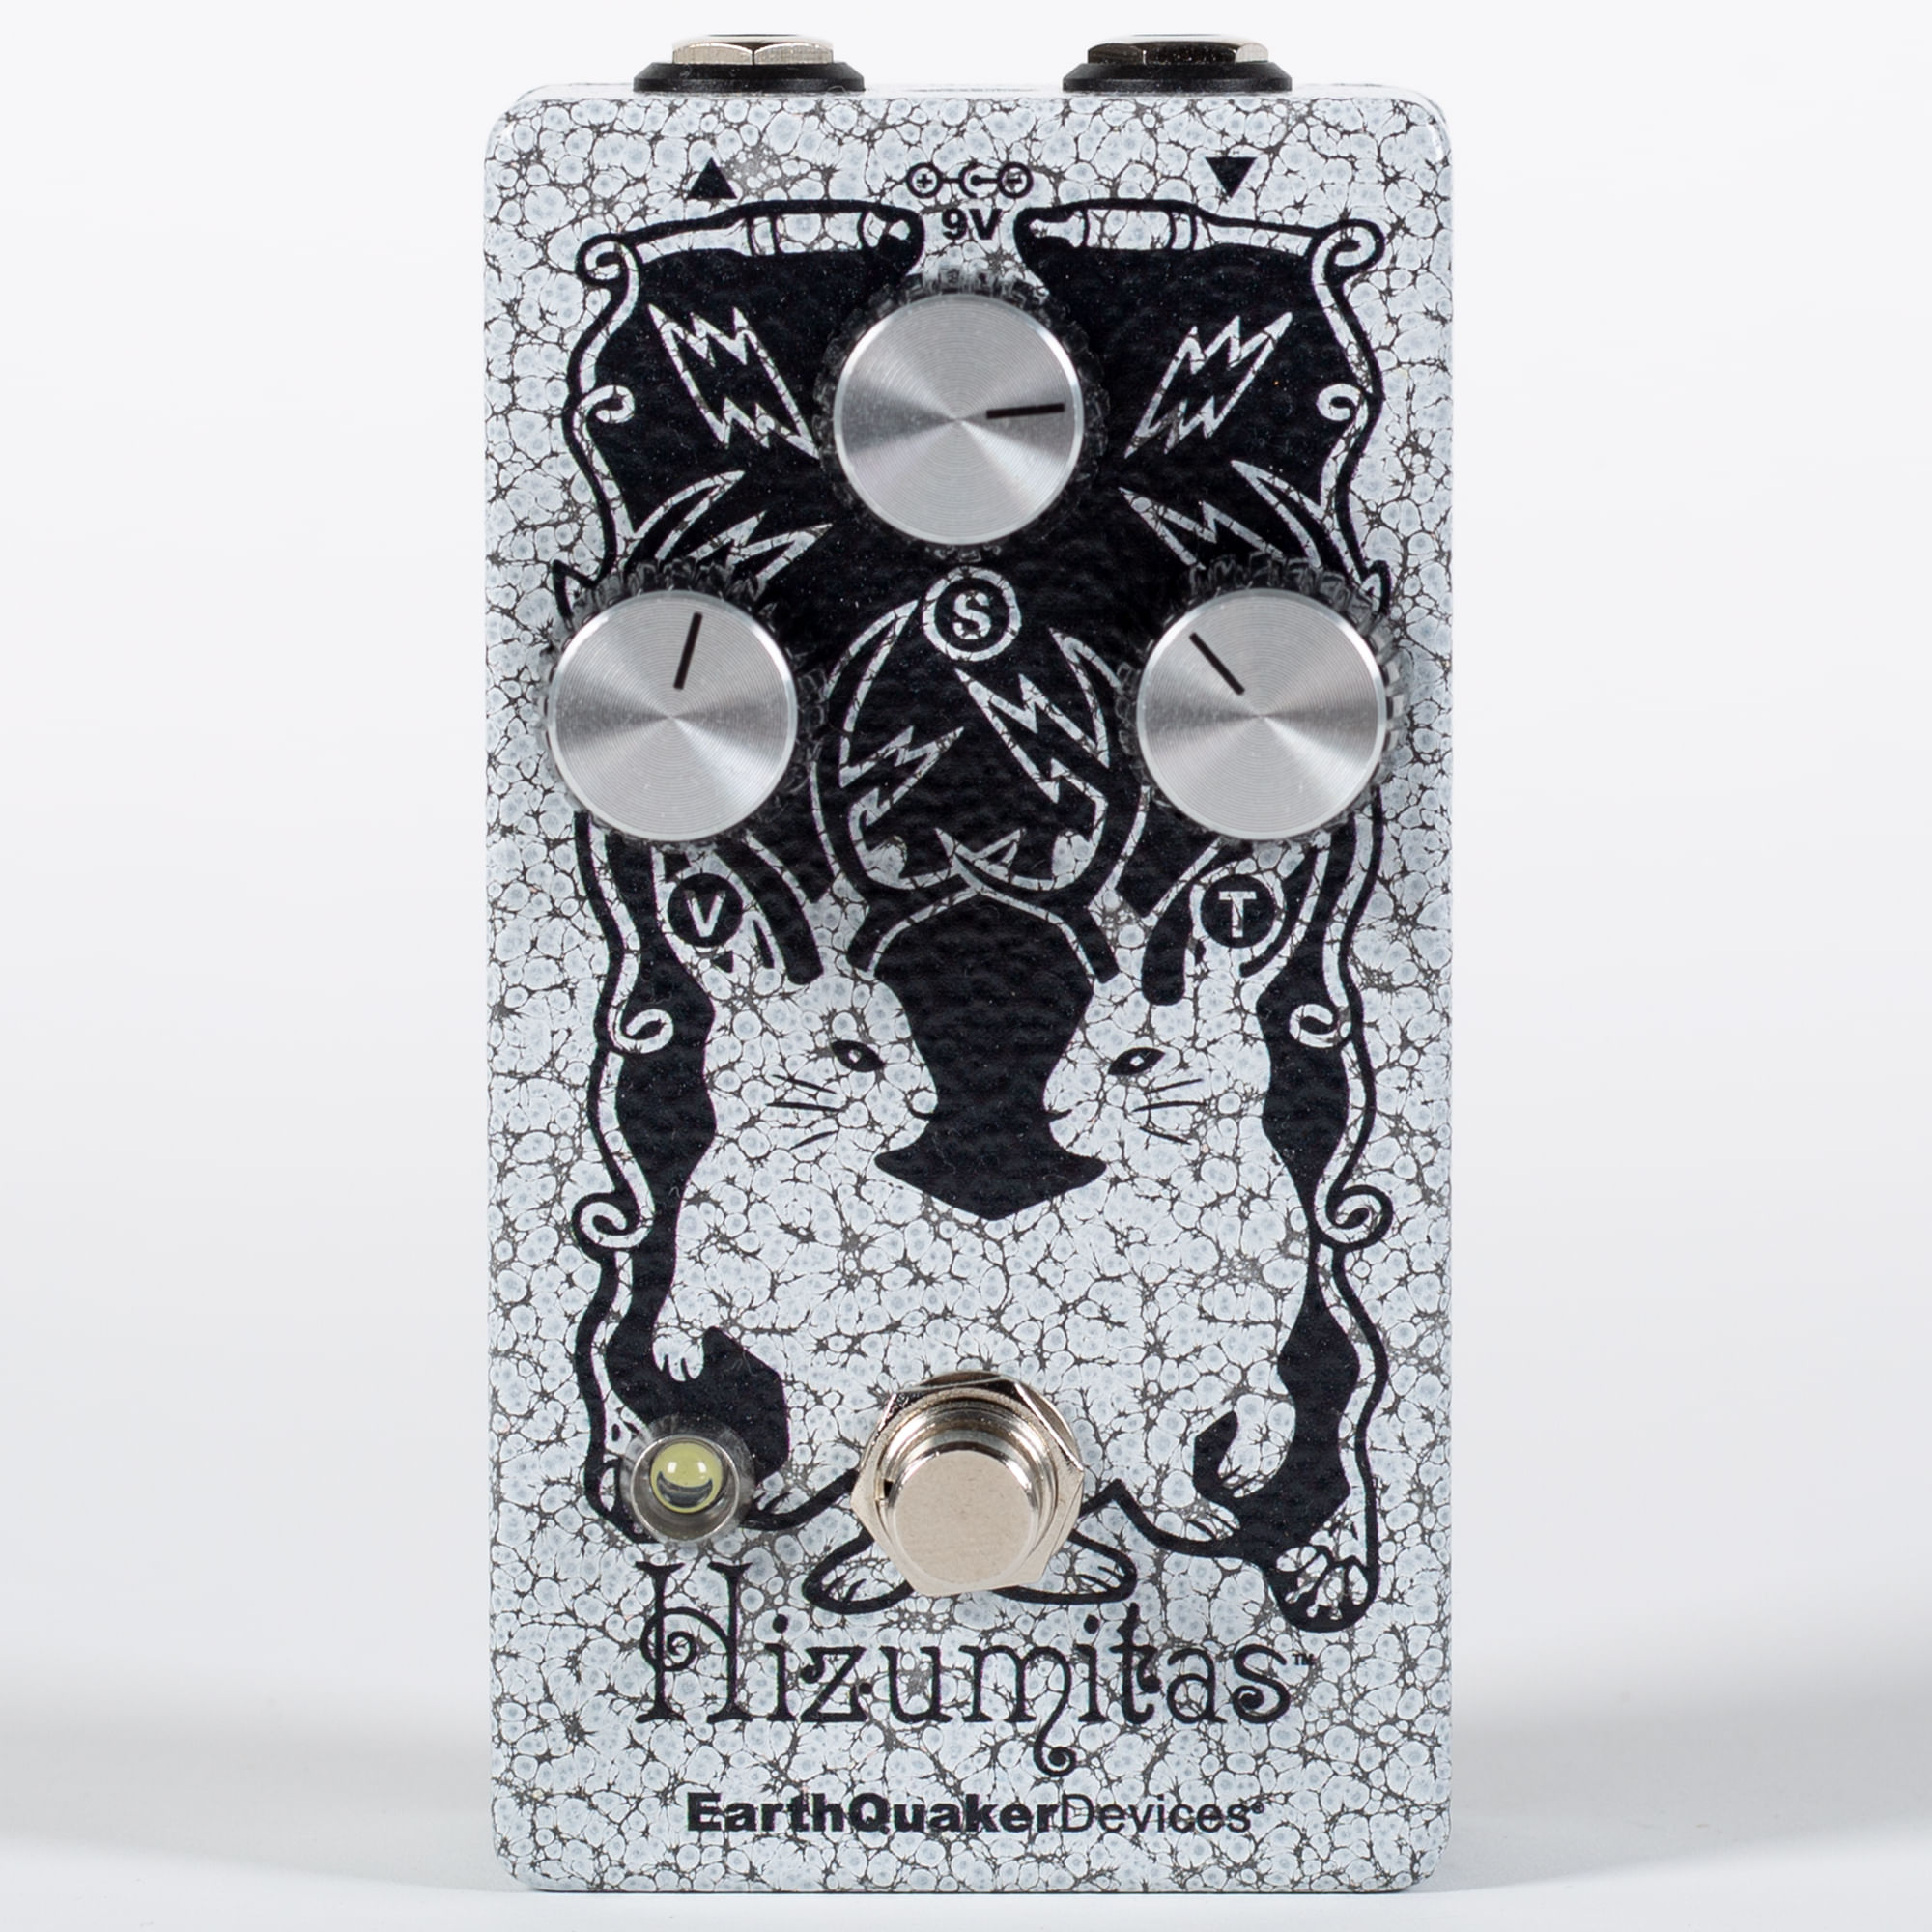 EarthQuaker Hizumitas Fuzz Sustainer Pedal - Limited Edition White Vein -  Cosmo Music | Canada's #1 Music Store - Shop, Rent, Repair